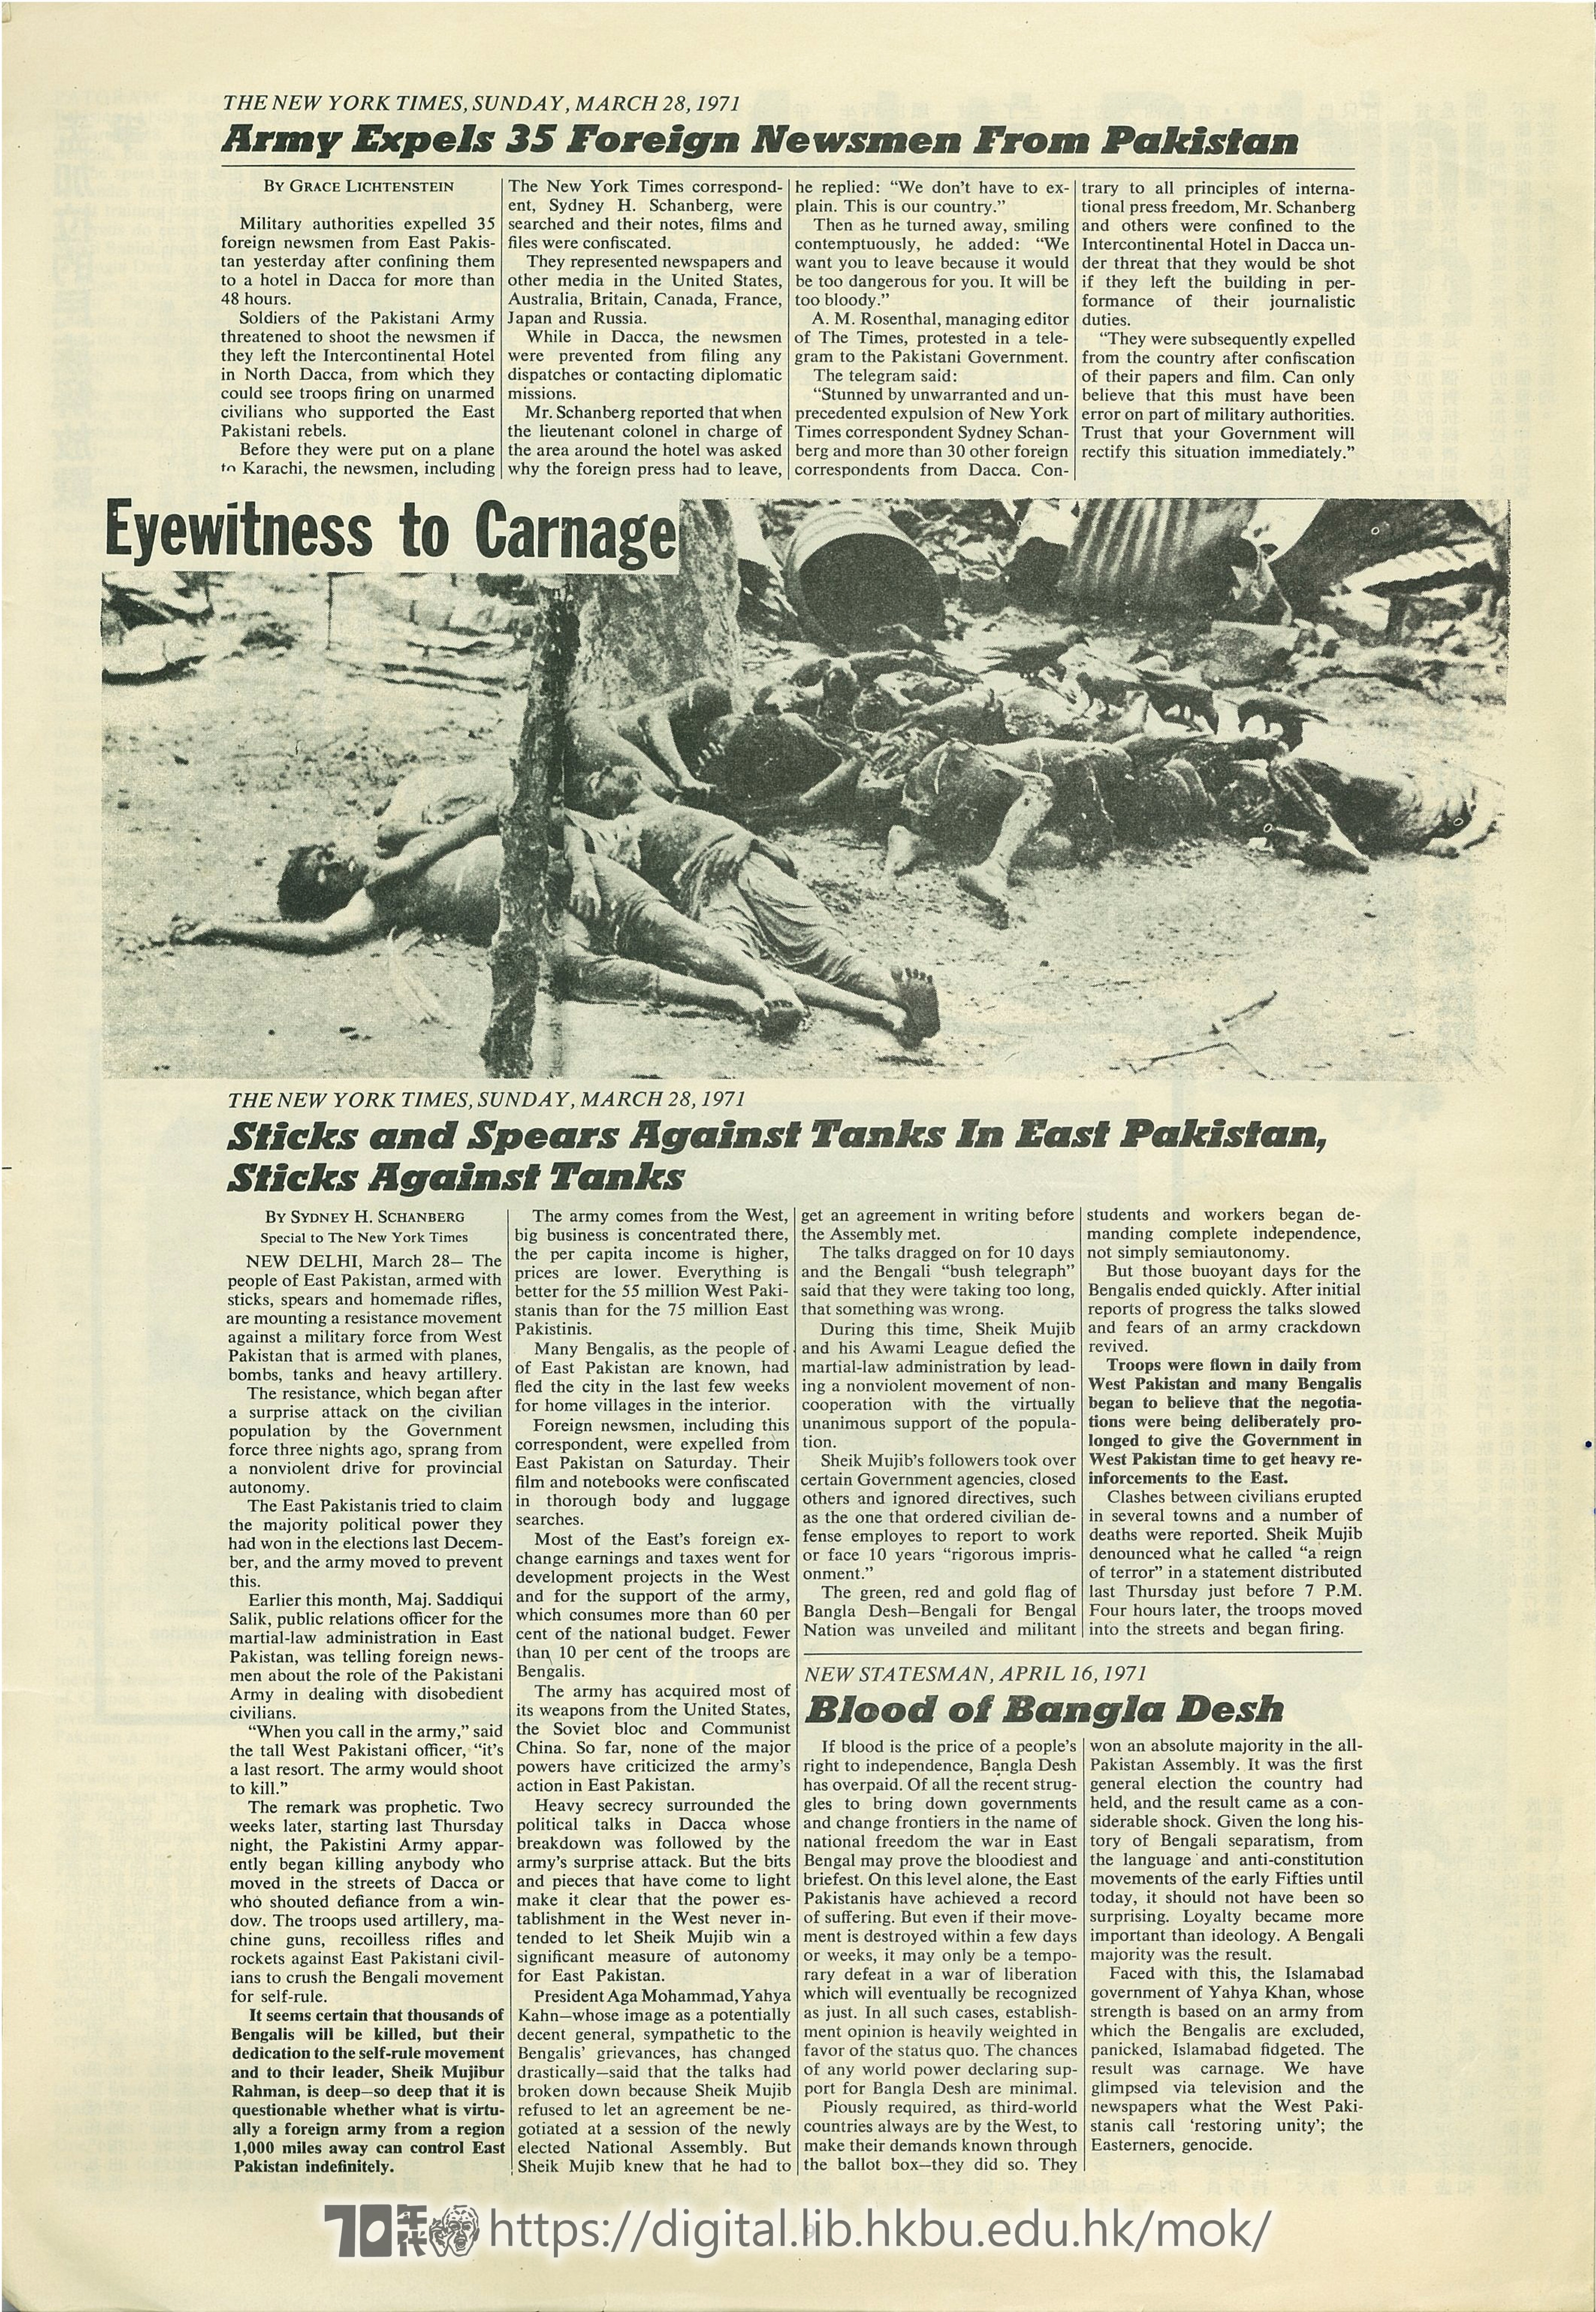  Special Issue Sticks and spear against tanks in East Pakistan, Sticks against tanks The New York Times, Sunday, March 28, 1971 